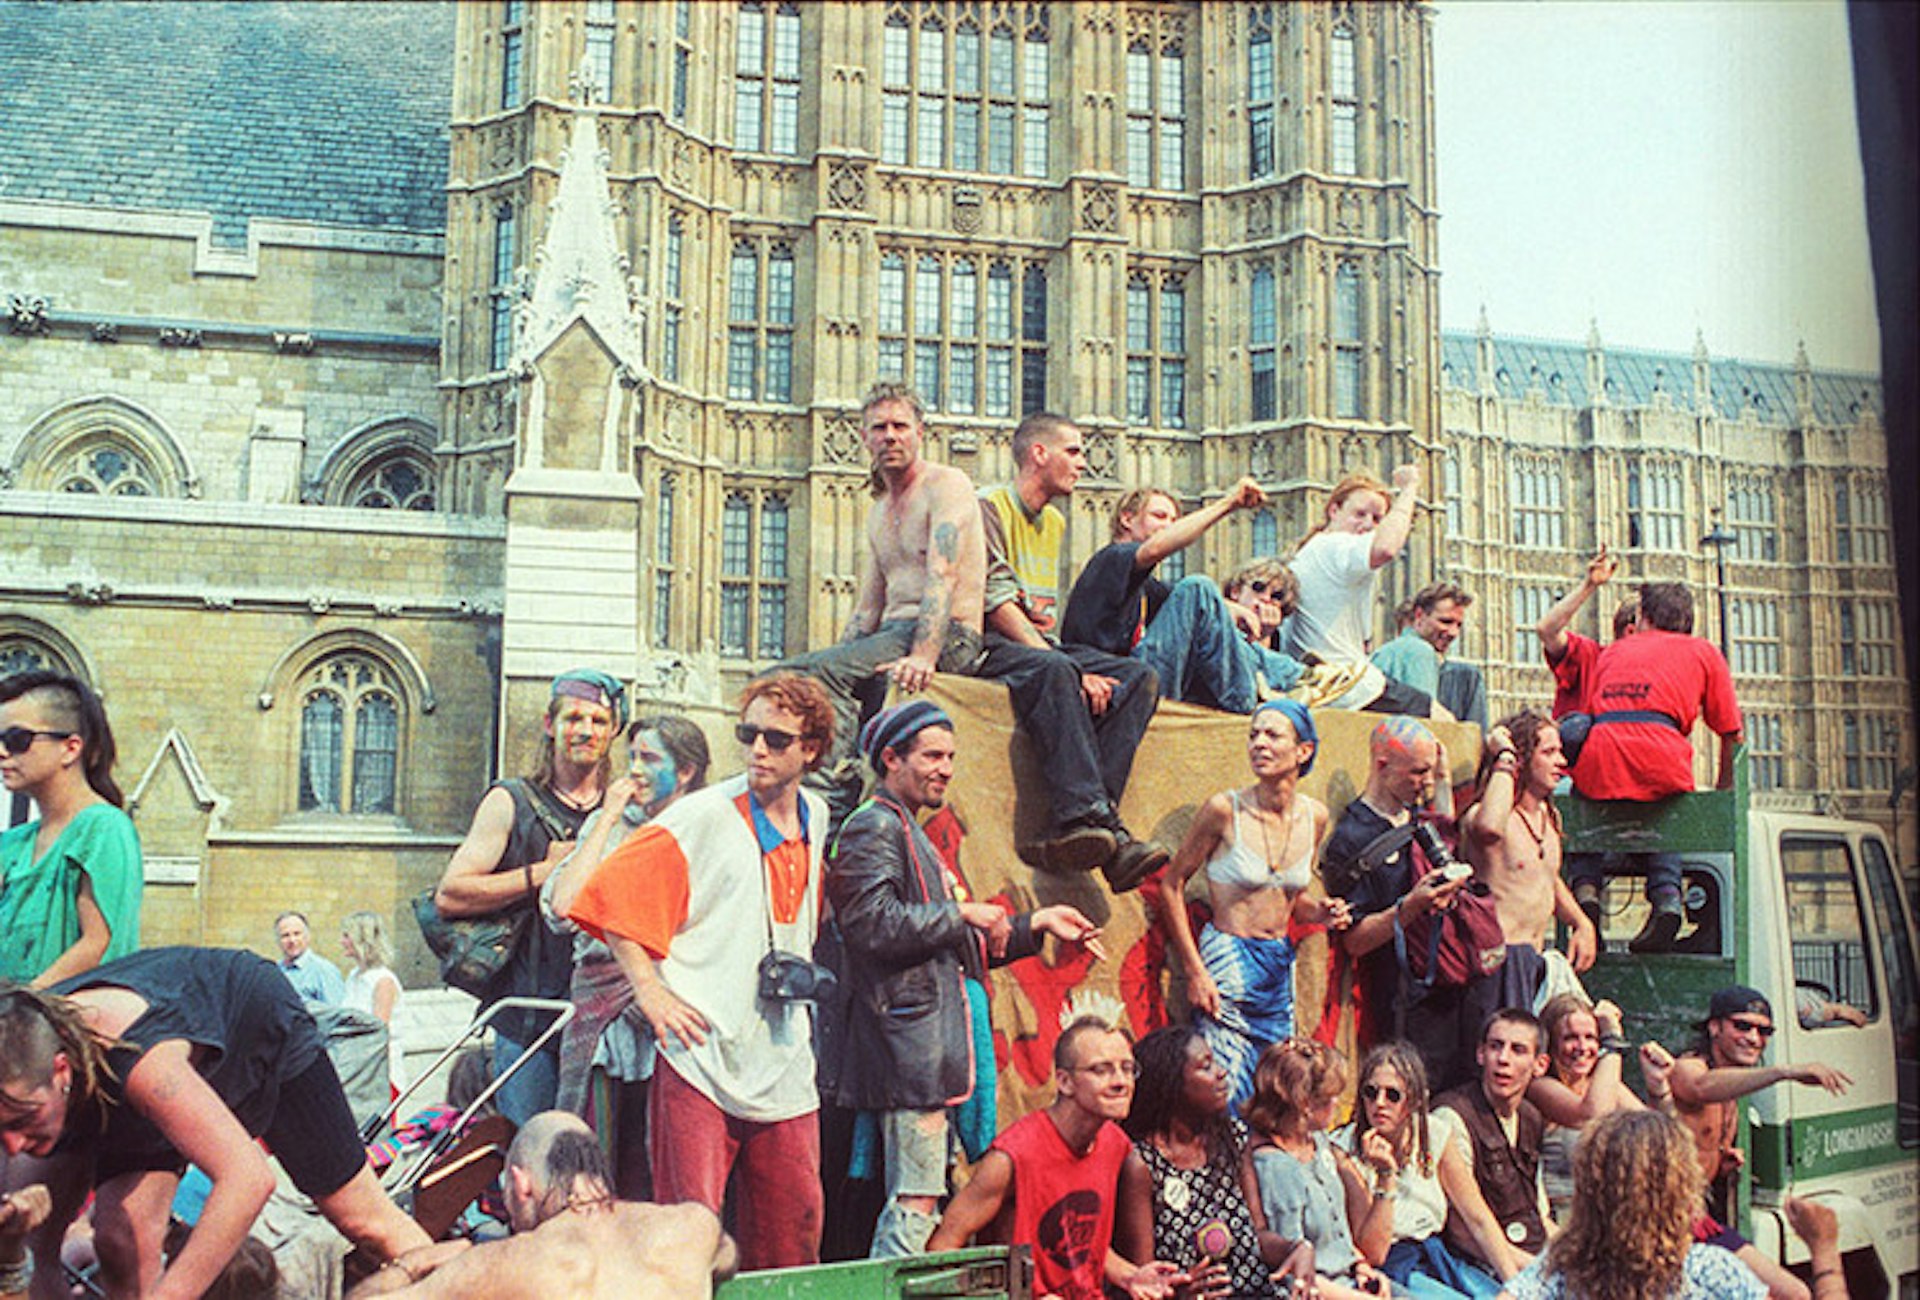 Protest of the Criminal Justice Bill in London, July 1994.